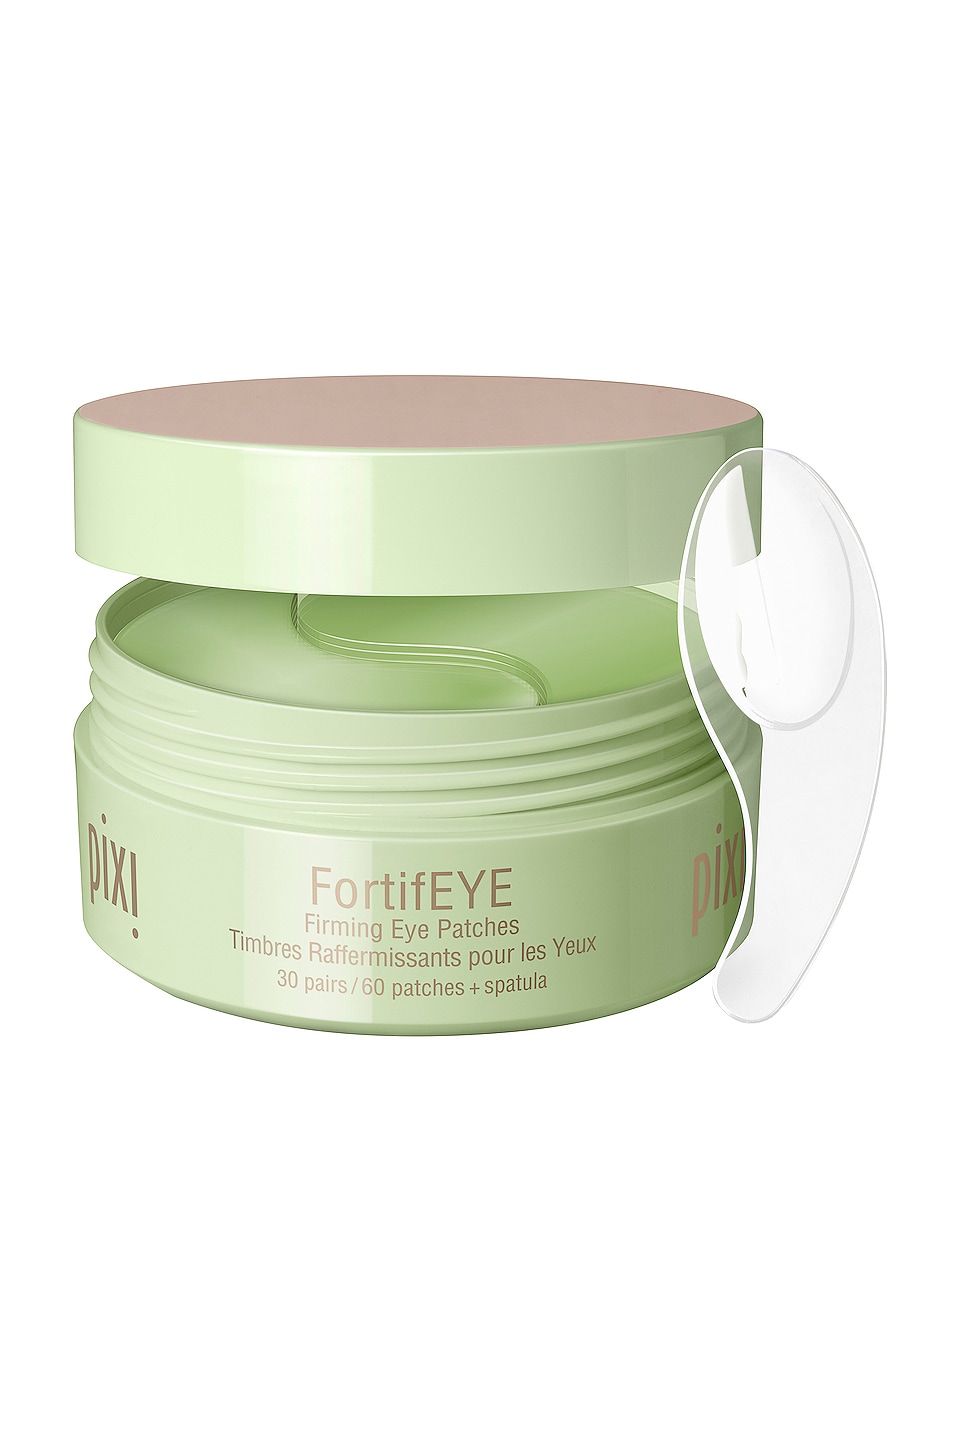 Shop Pixi Fortifeye Eye Patches In N,a